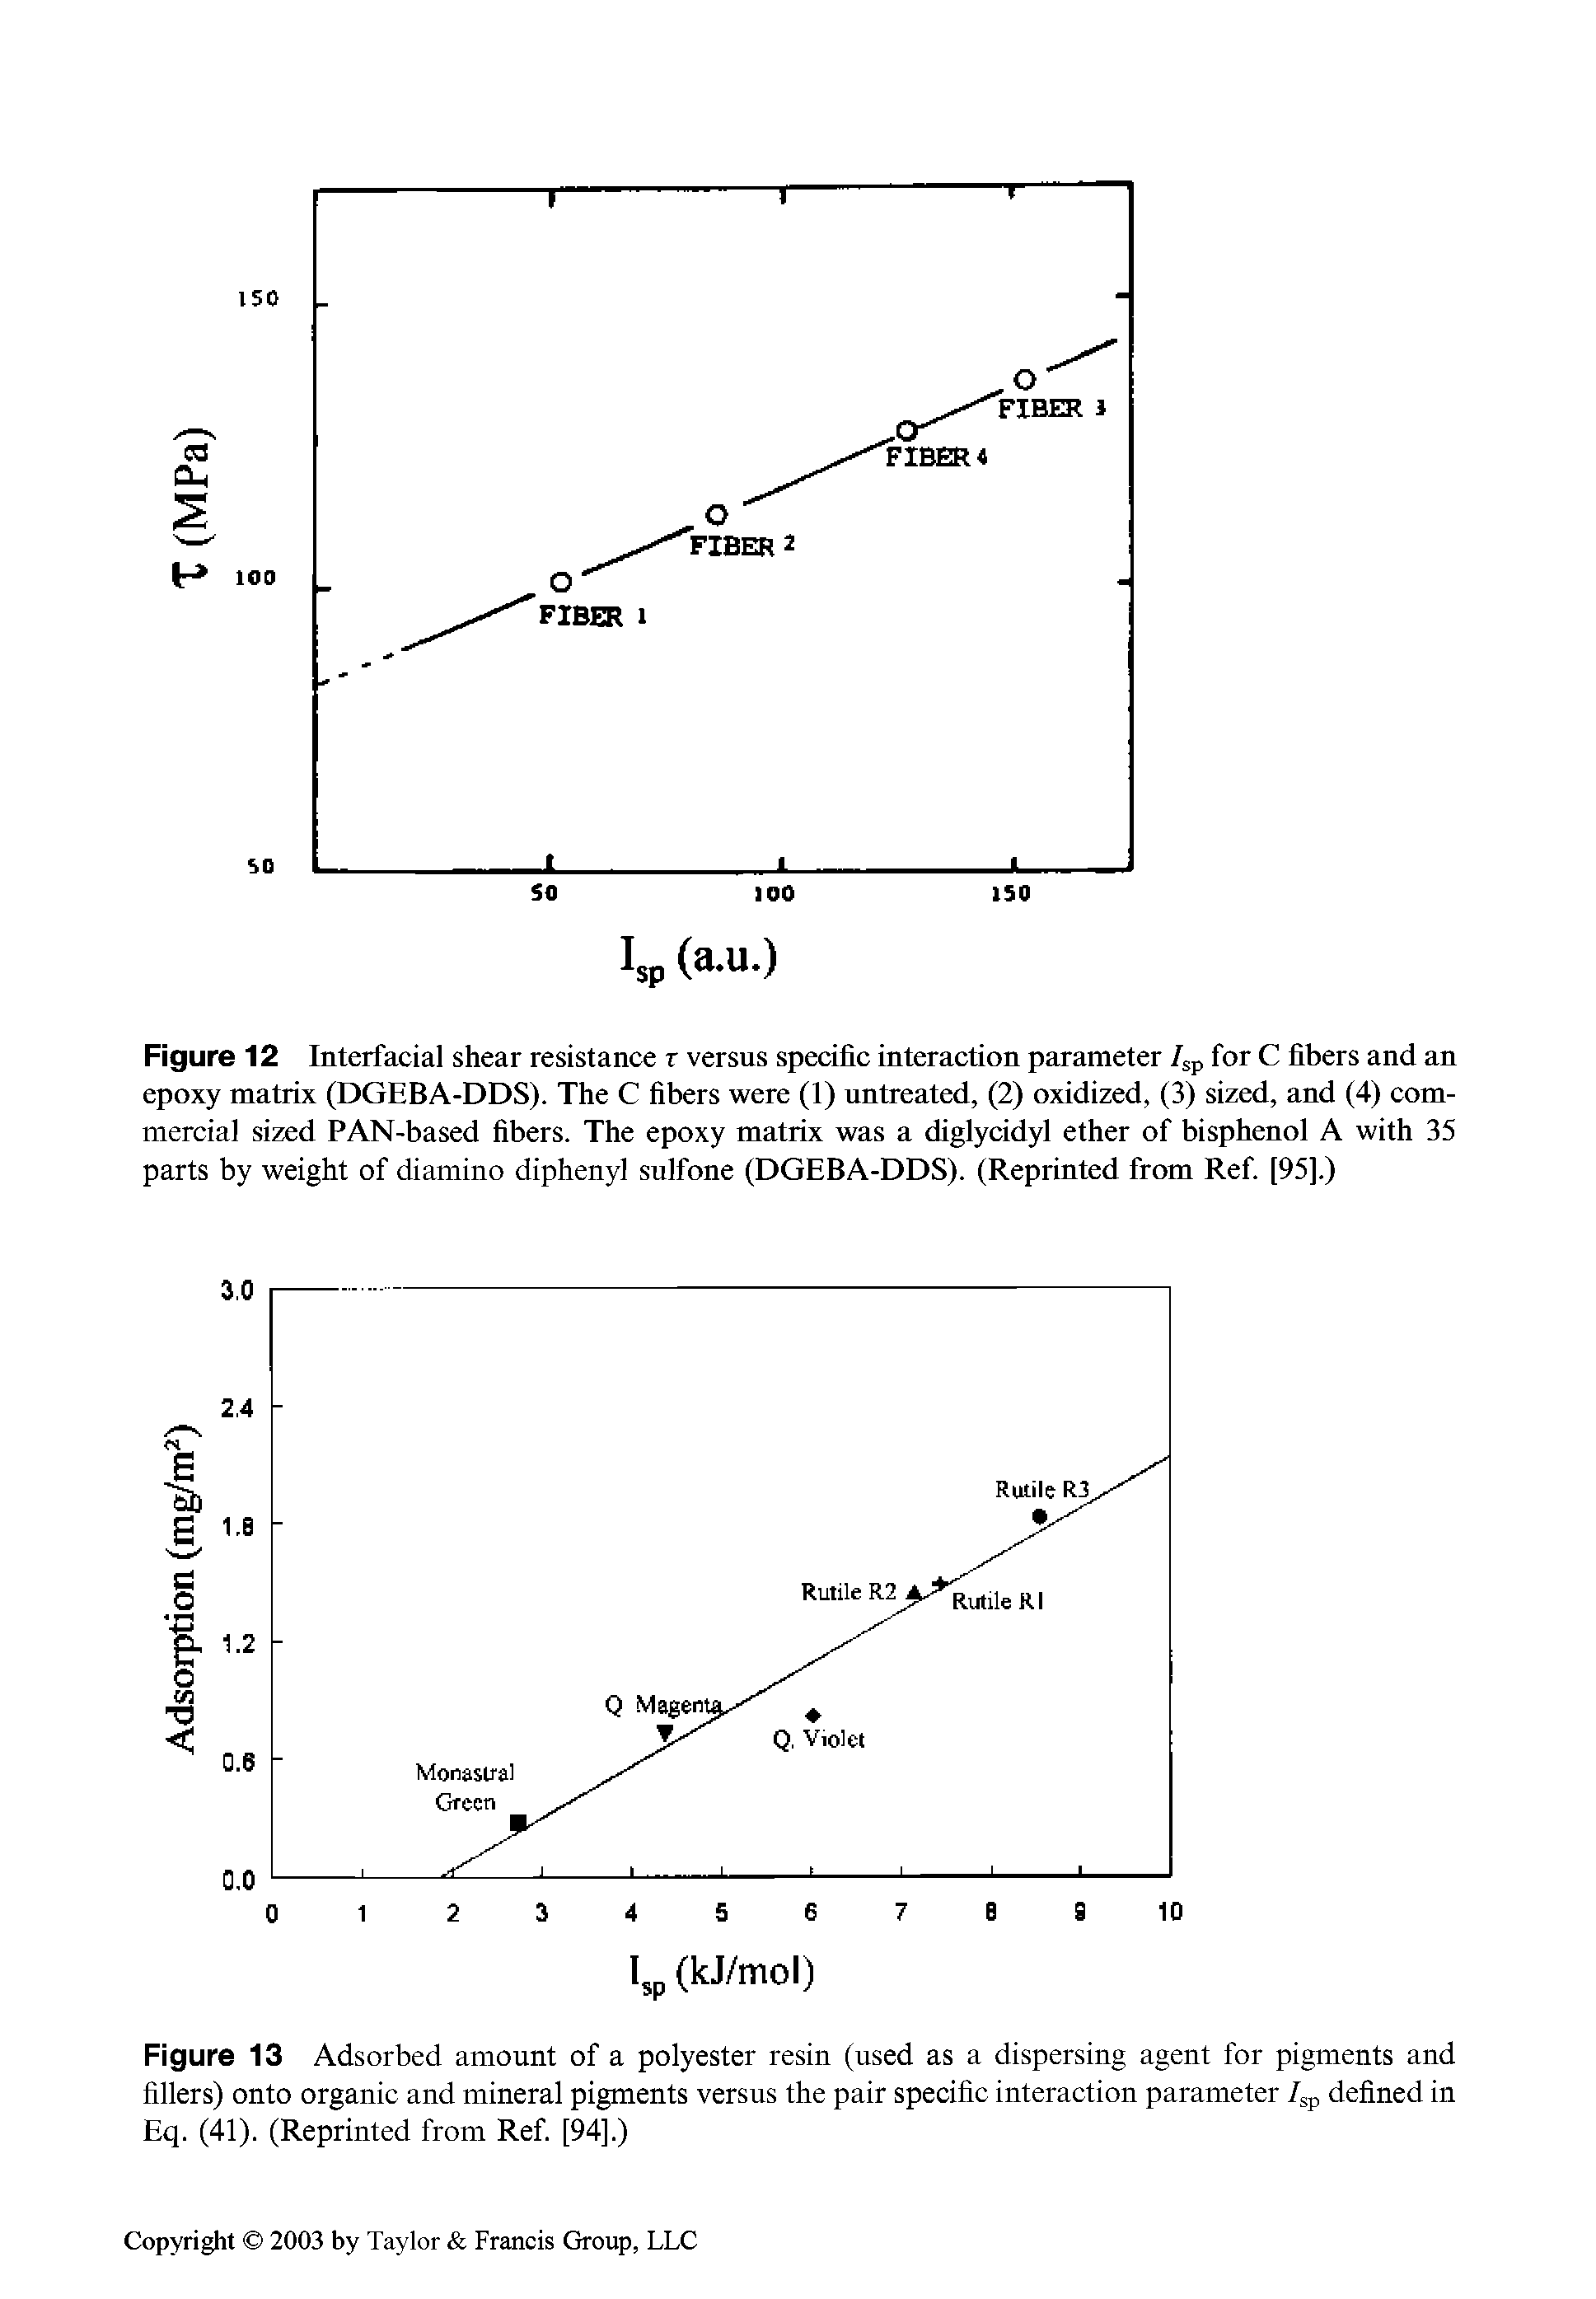 Figure 13 Adsorbed amount of a polyester resin (used as a dispersing agent for pigments and fillers) onto organic and mineral pigments versus the pair specific interaction parameter I p defined in Eq. (41). (Reprinted from Ref. [94].)...